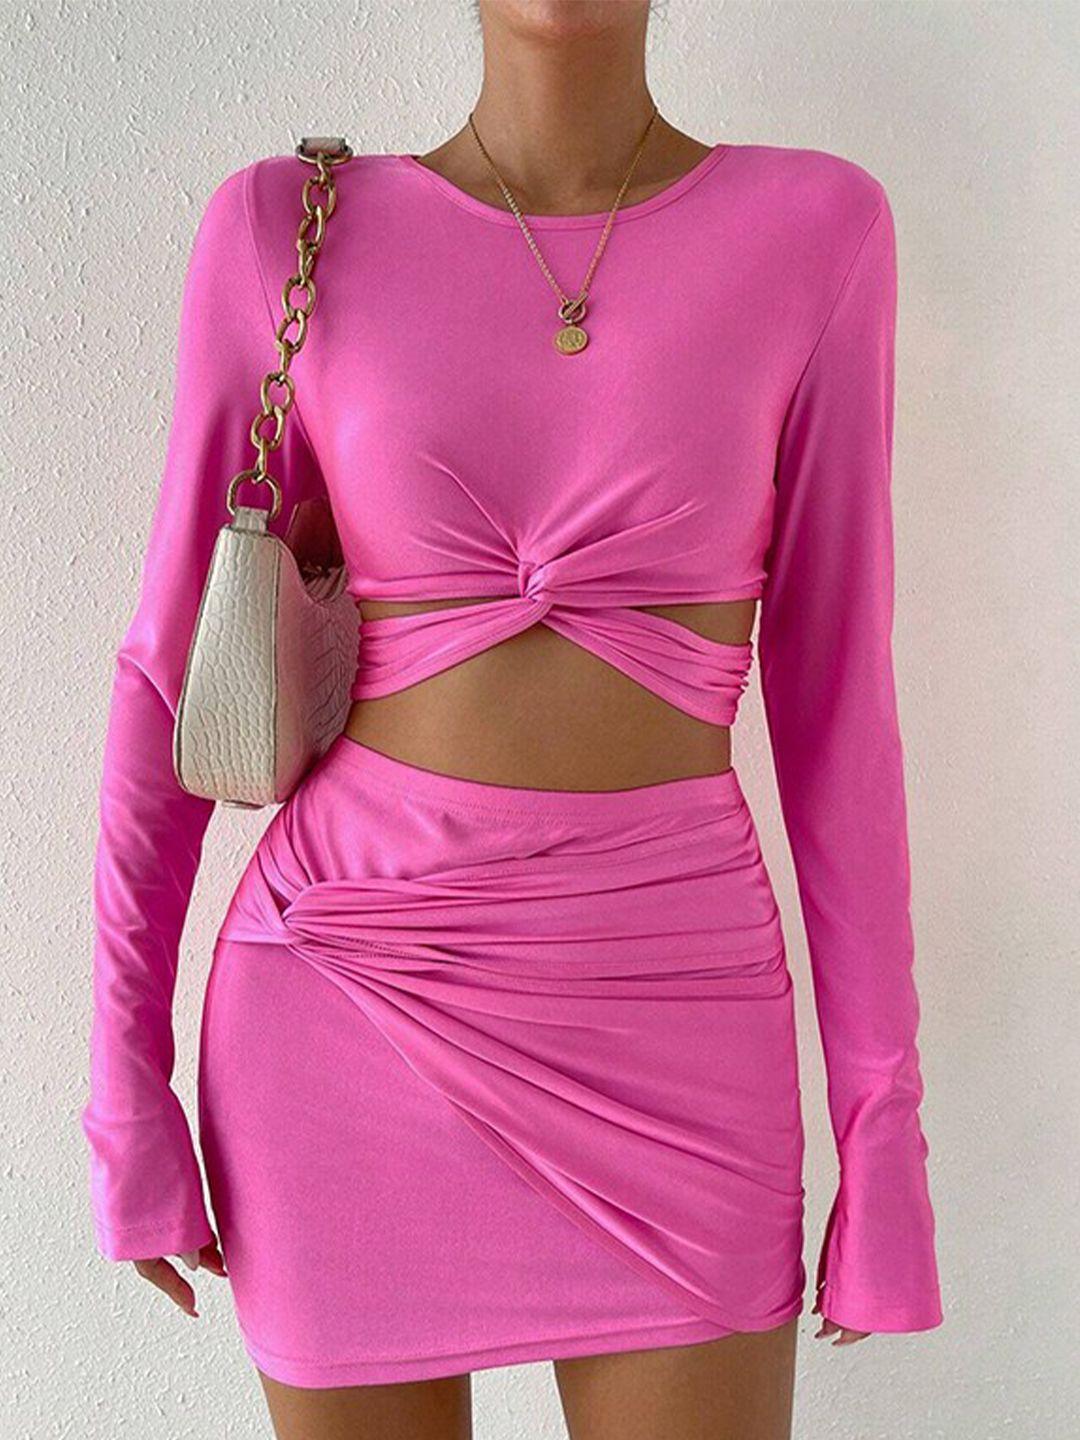 stylecast fuchsia twisted crop top with skirt